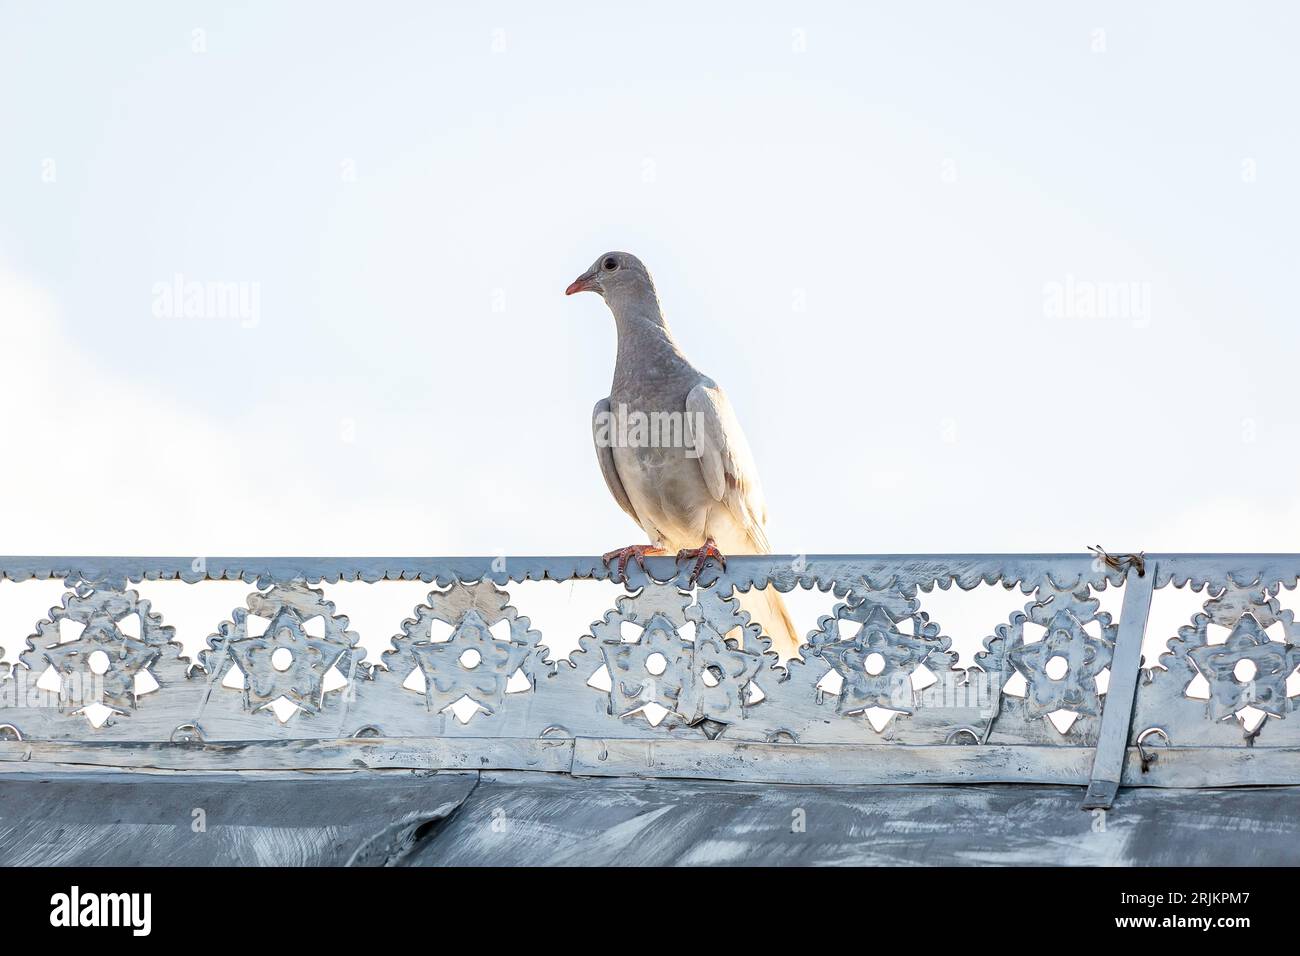 A rock dove standing atop a bridge and surveys its surroundings while looking out into the sky Stock Photo